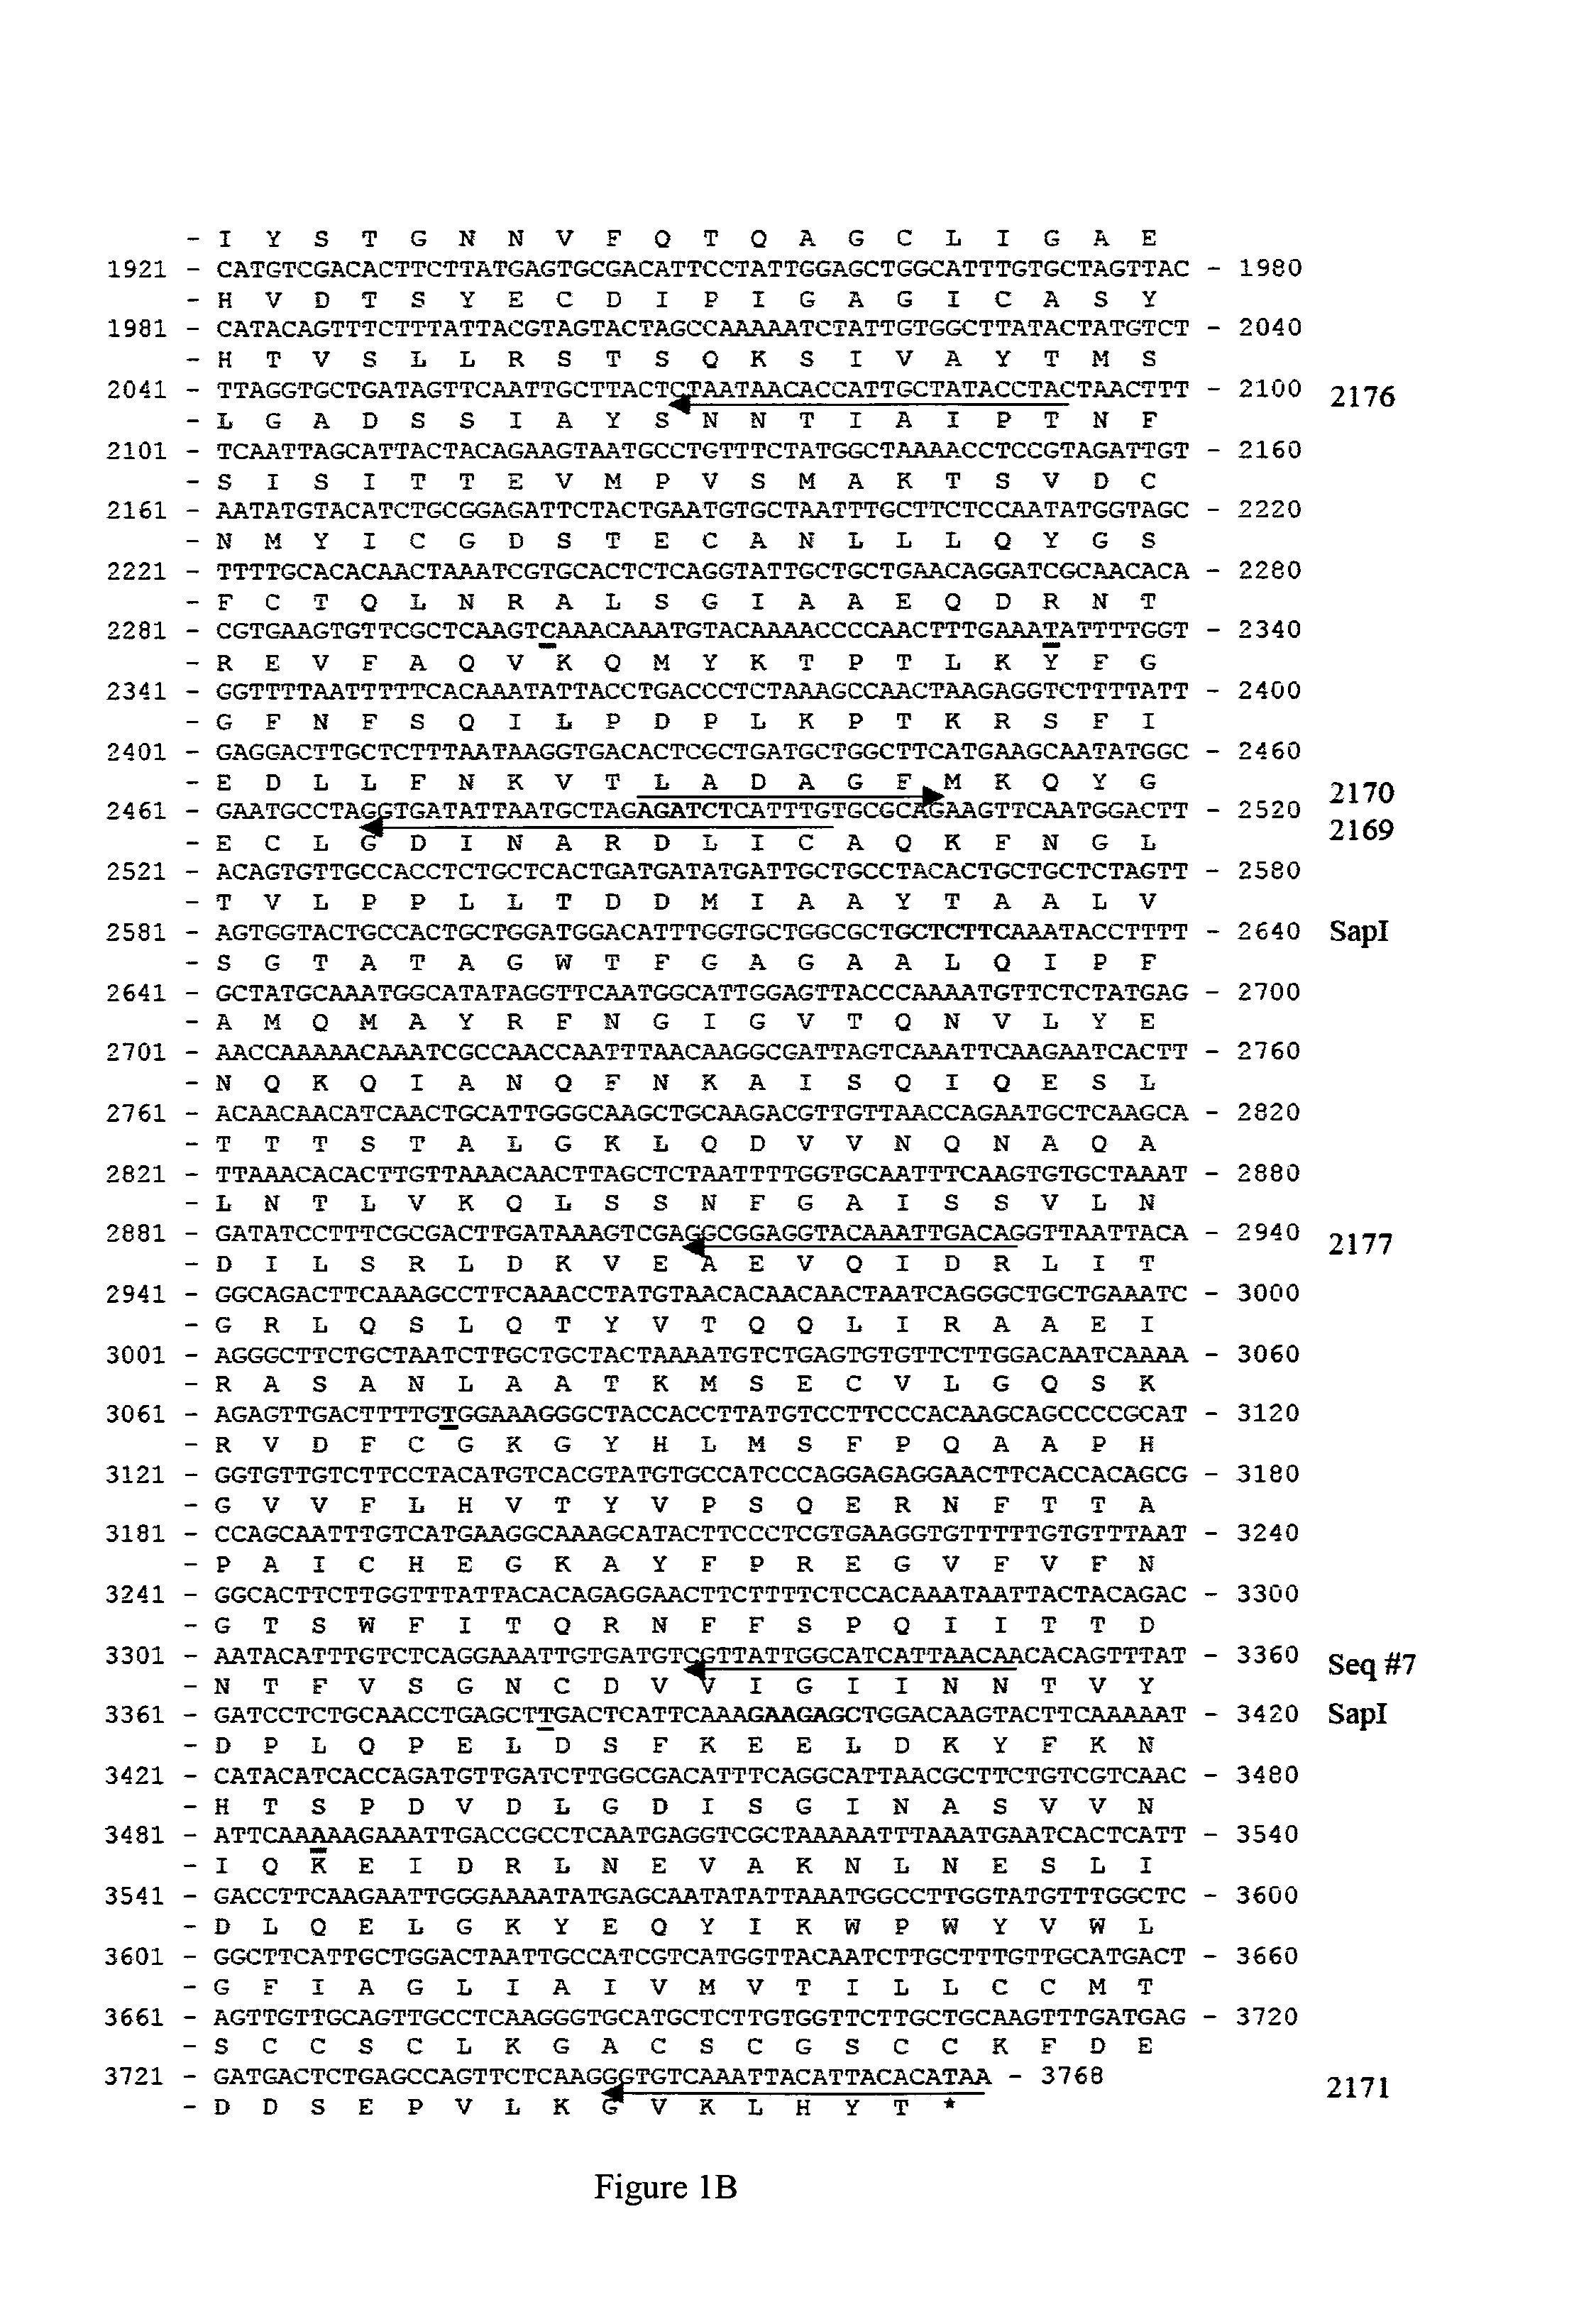 Vectors expressing SARS immunogens, compositions containing such vectors or expression products thereof, methods and assays for making and using